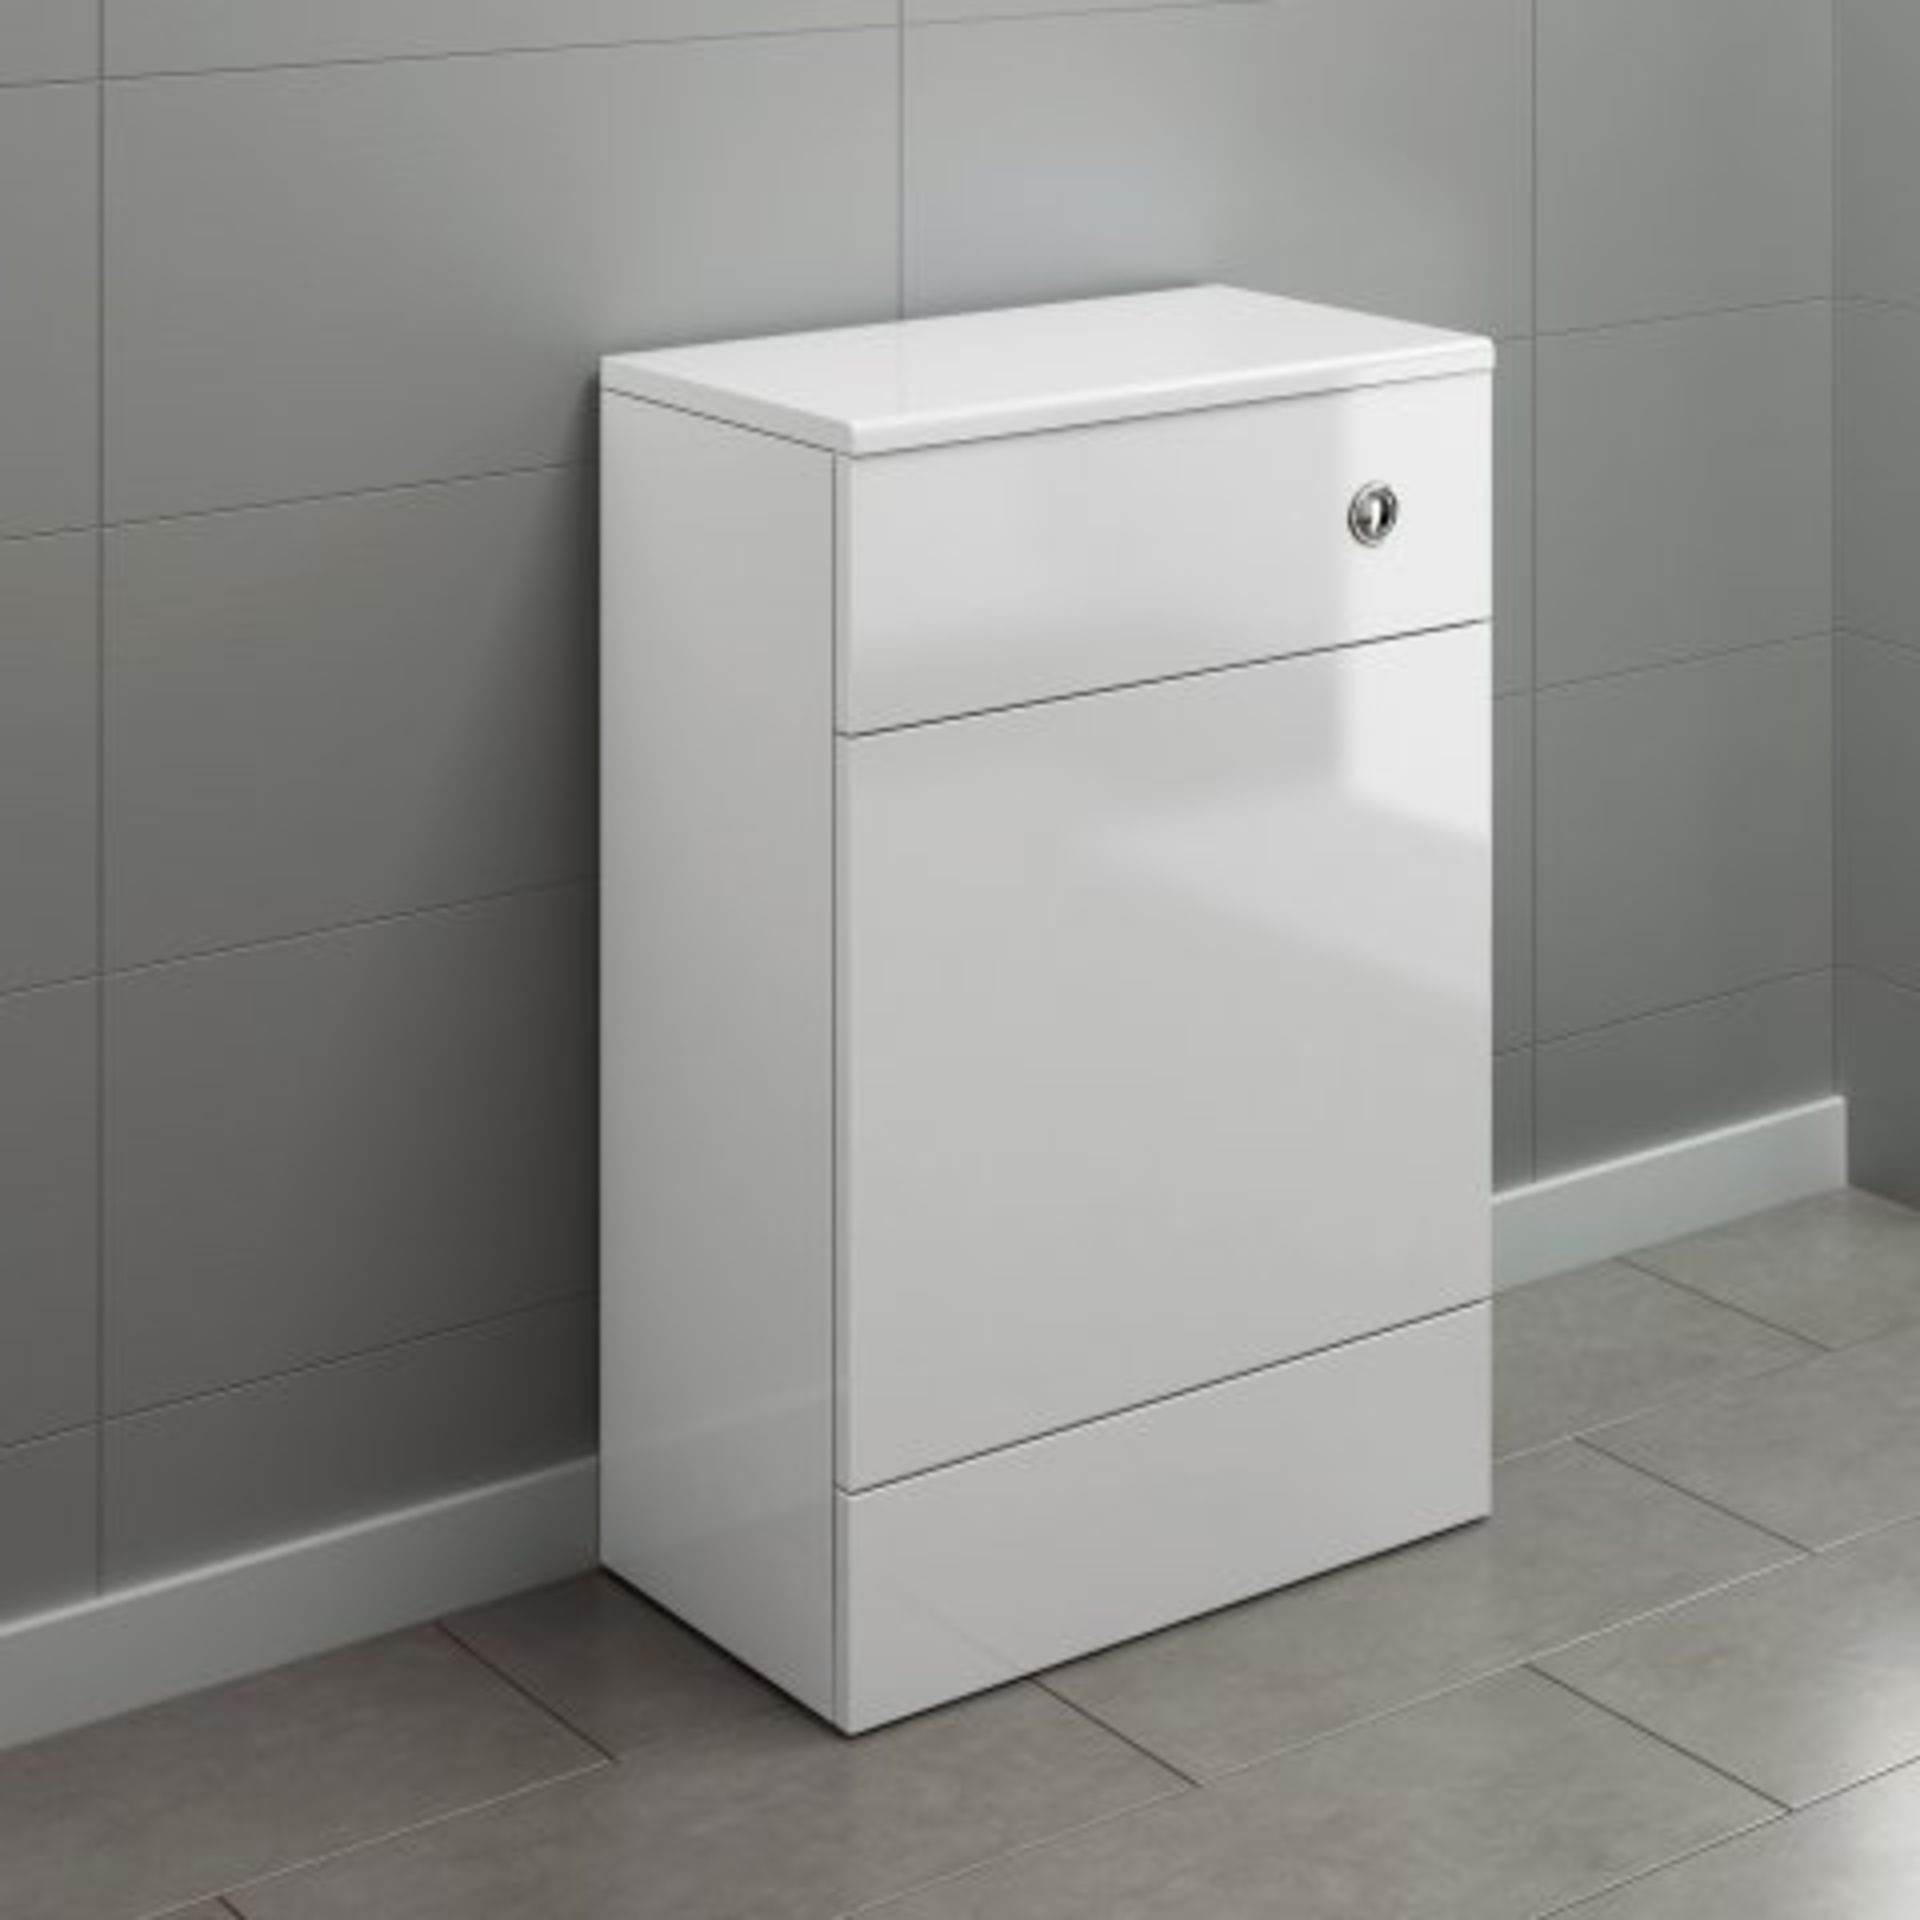 (O34) 500mm Harper Gloss White Back To Wall Toilet Unit. RRP £174.99. This practical Harper Gloss